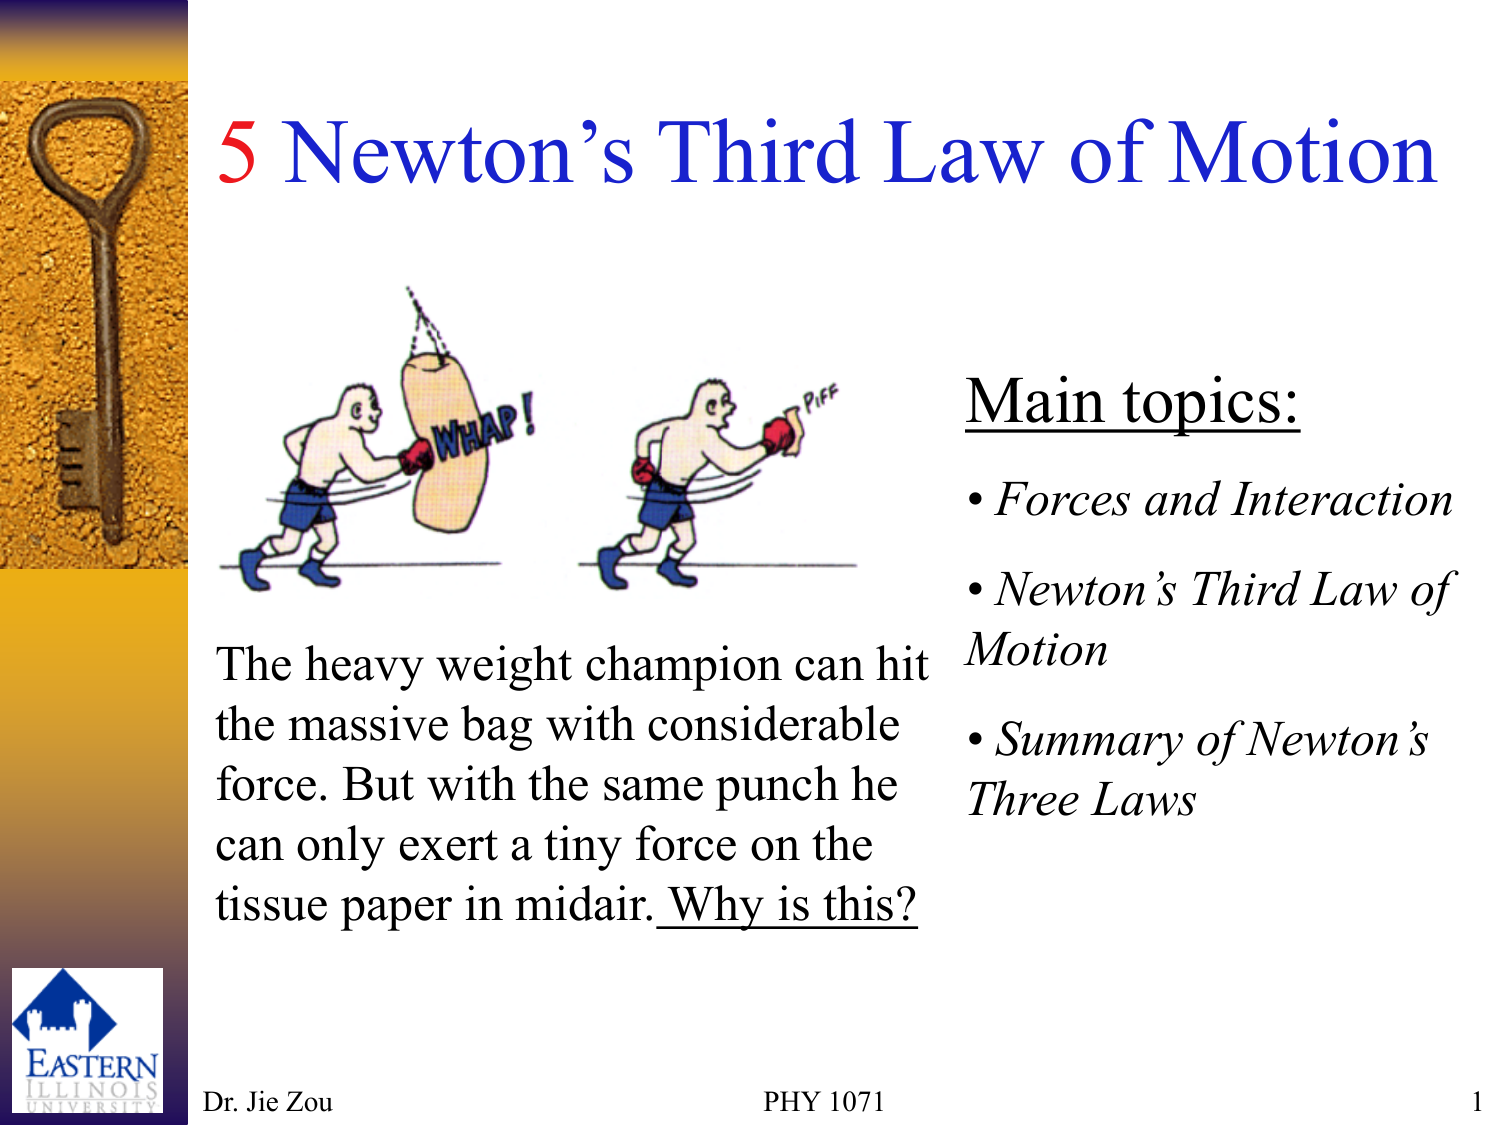 Explain Newton's First Law Of Motion